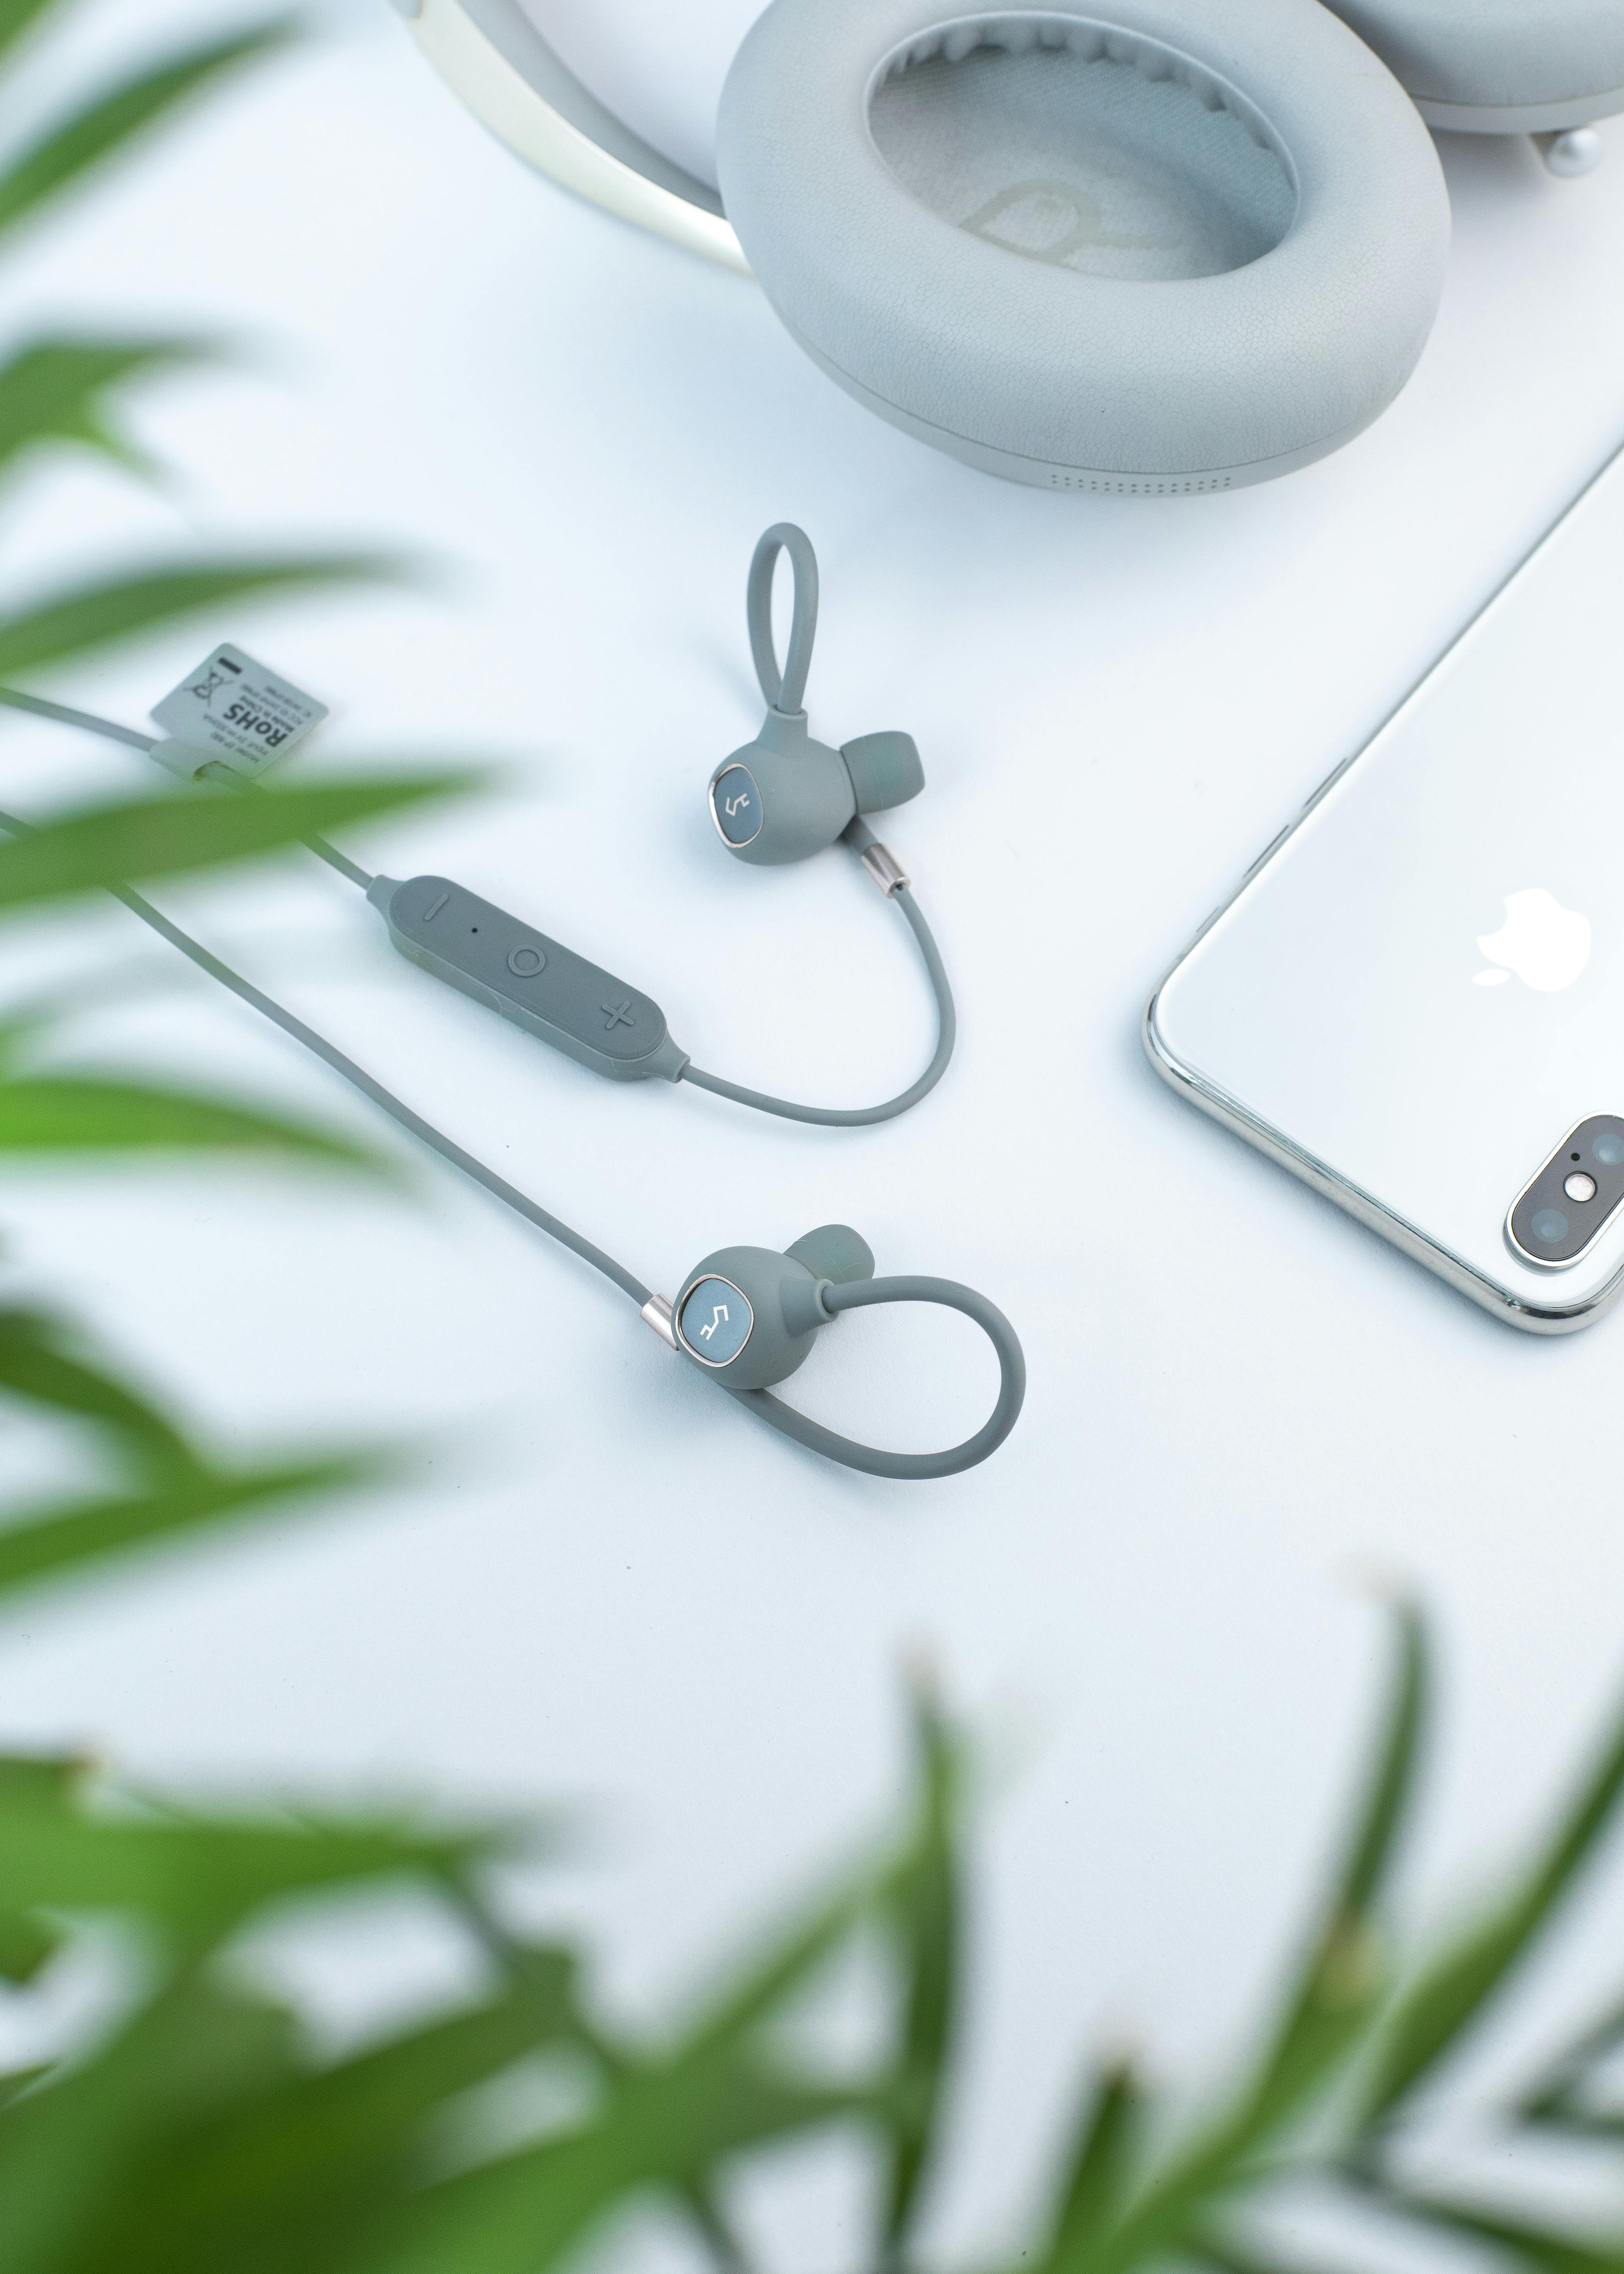 contemporary earphones and headphones on white table near smartphone